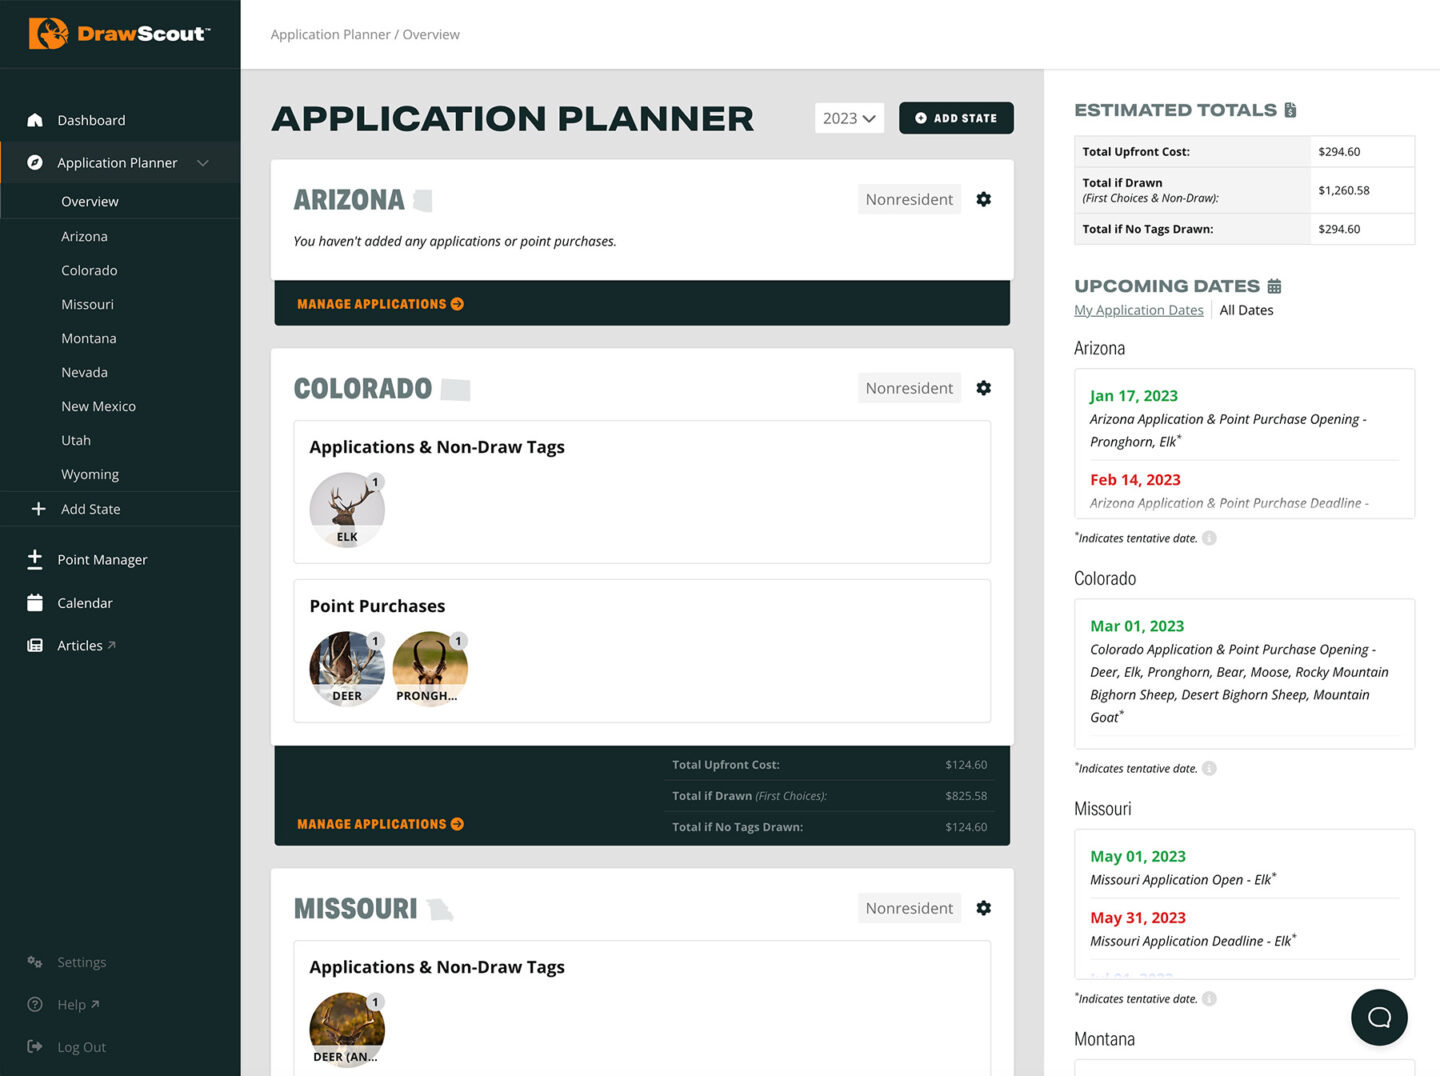 DrawScout Application Planner